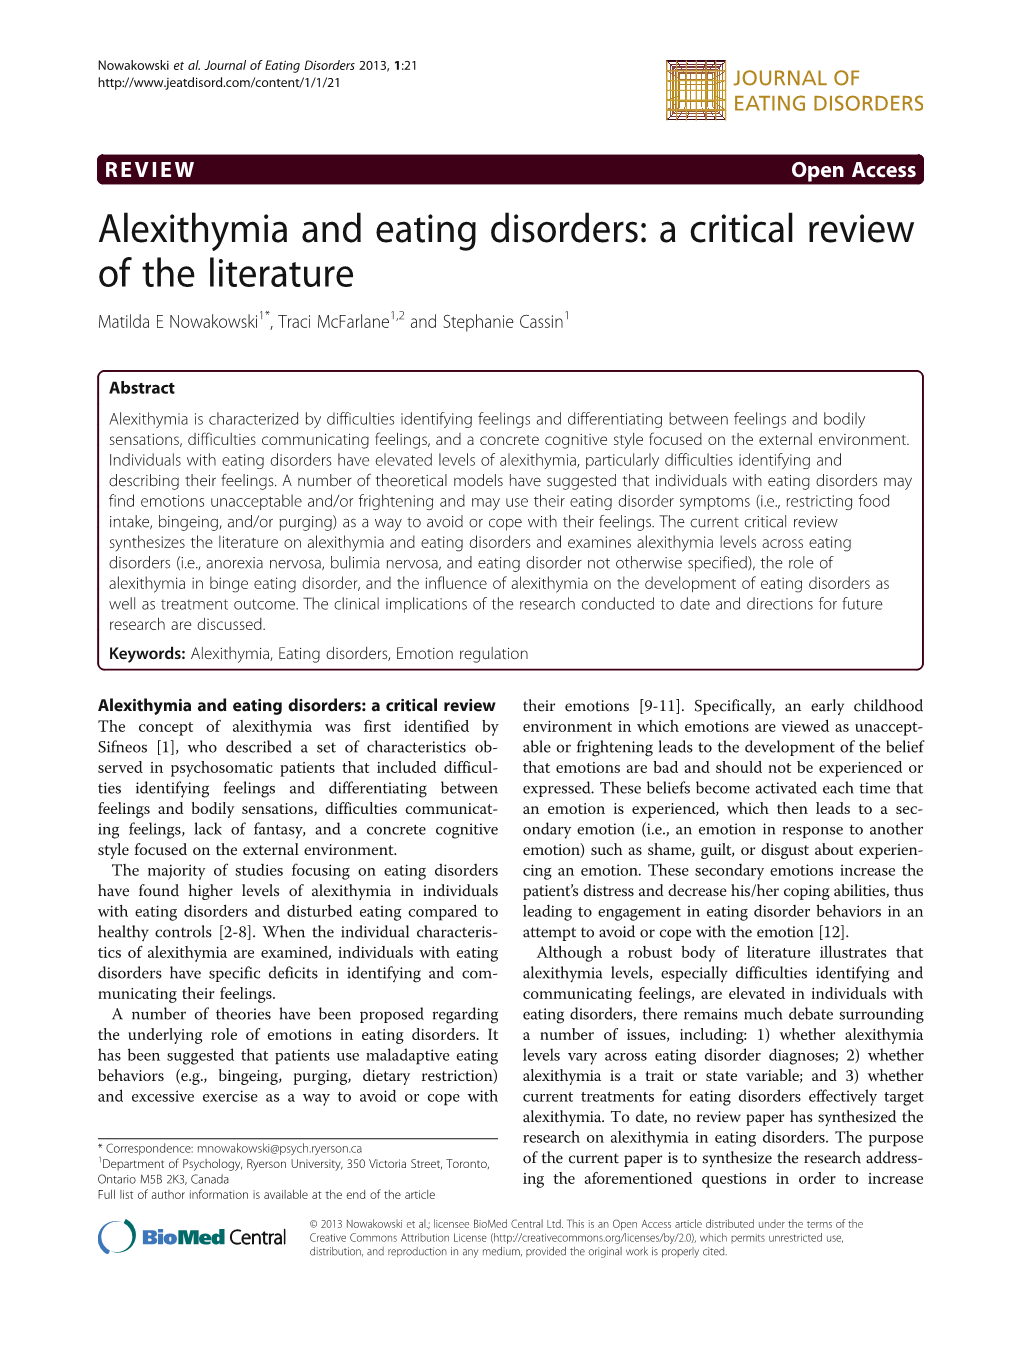 Alexithymia and Eating Disorders: a Critical Review of the Literature Matilda E Nowakowski1*, Traci Mcfarlane1,2 and Stephanie Cassin1